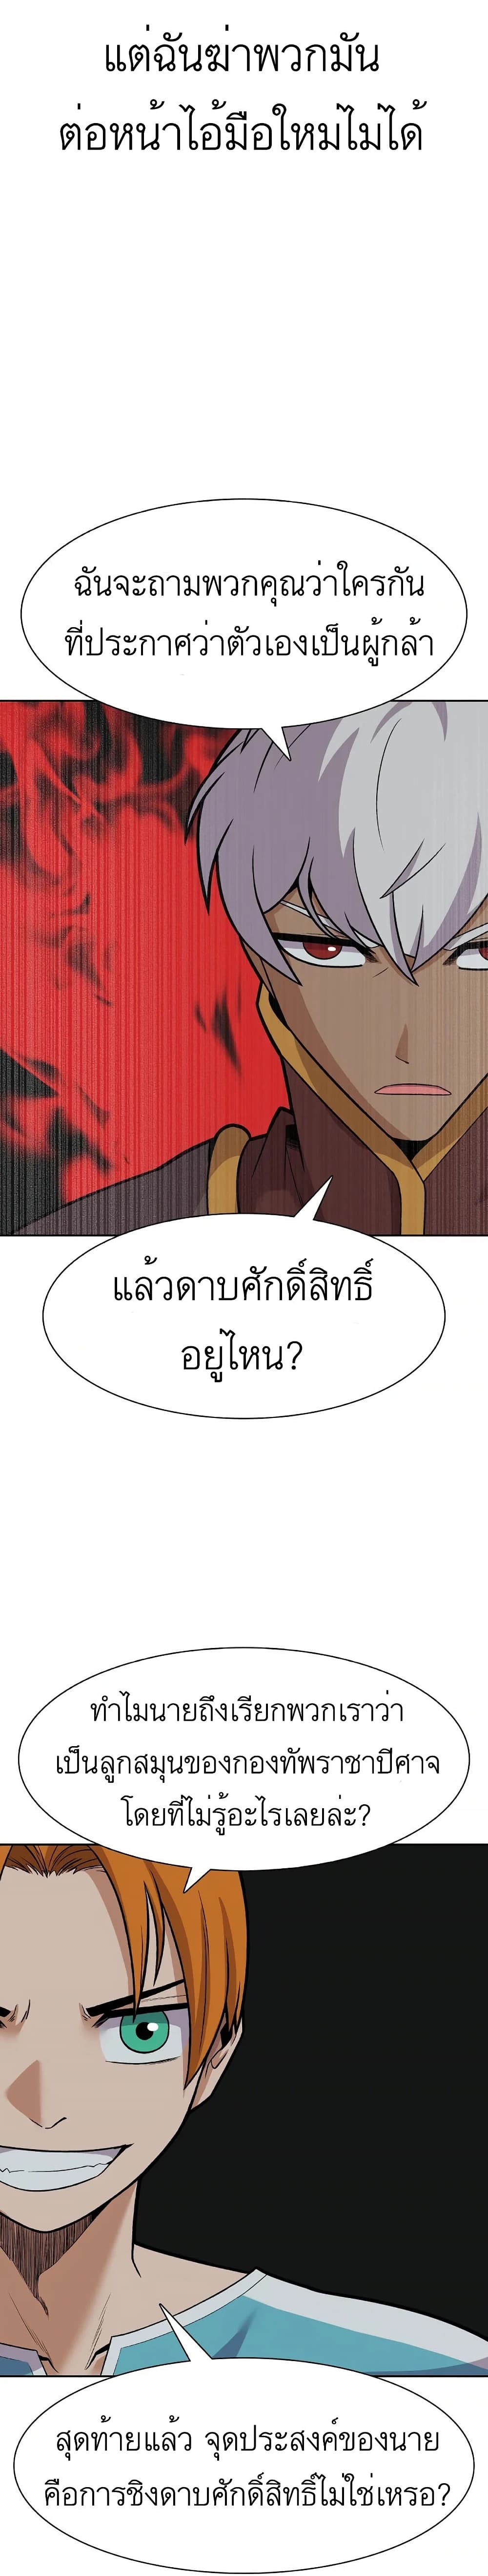 Raising Newbie Heroes In Another World ตอนที่ 14 (20)